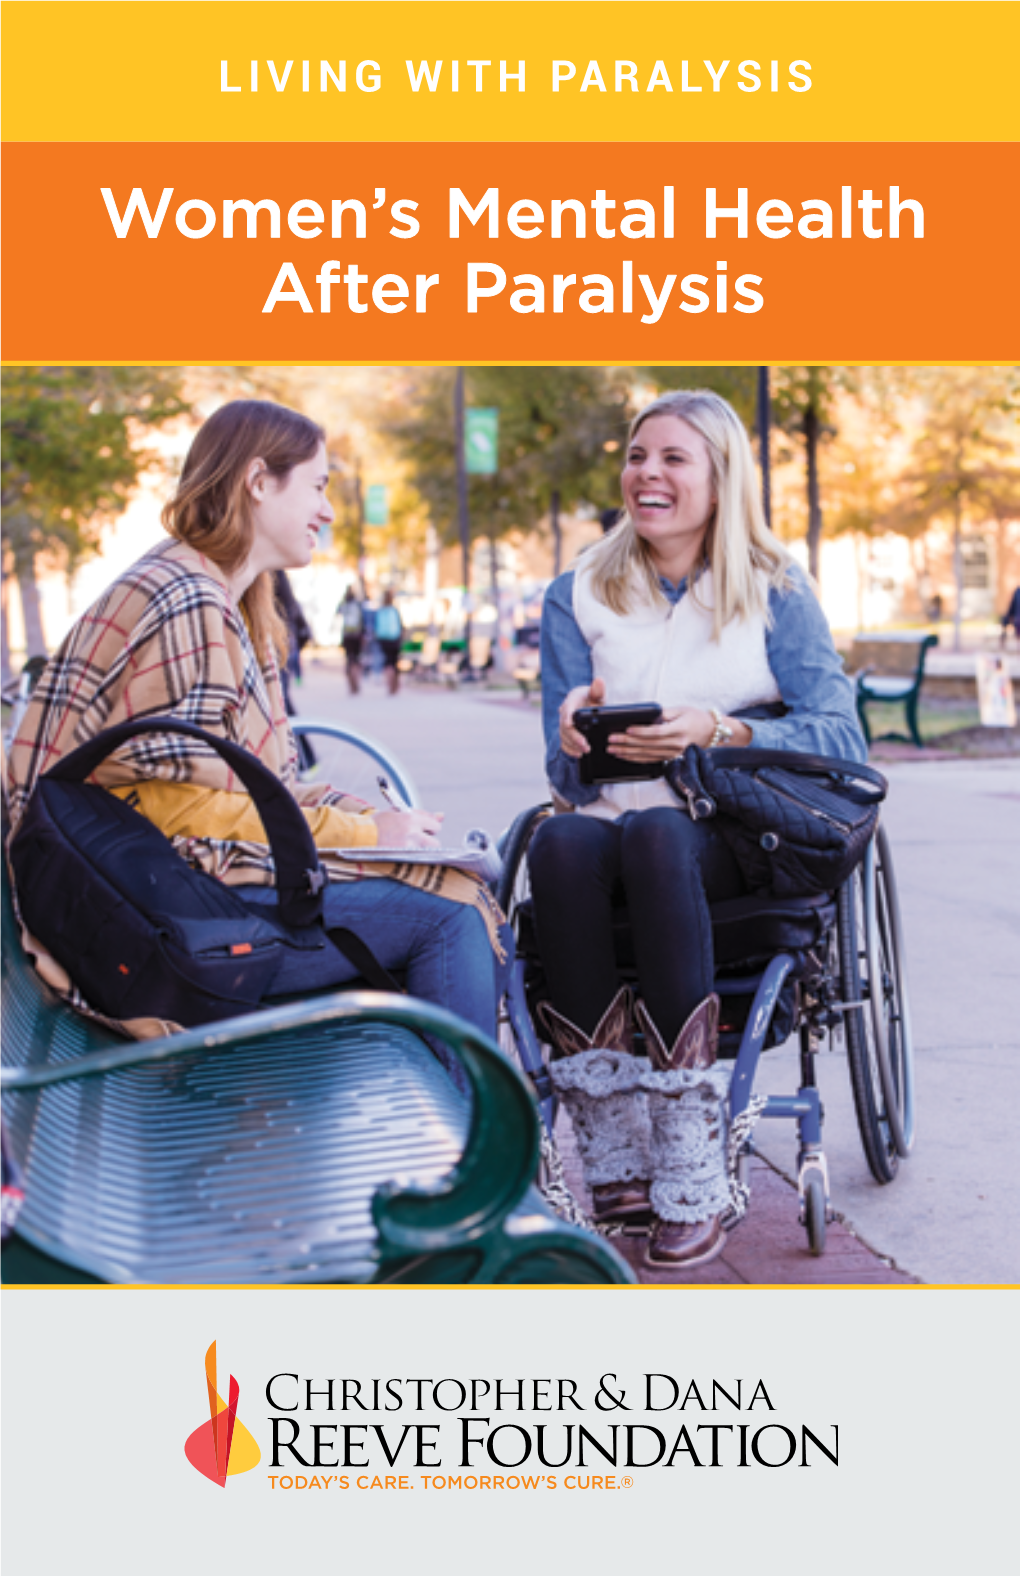 Women's Mental Health After Paralysis